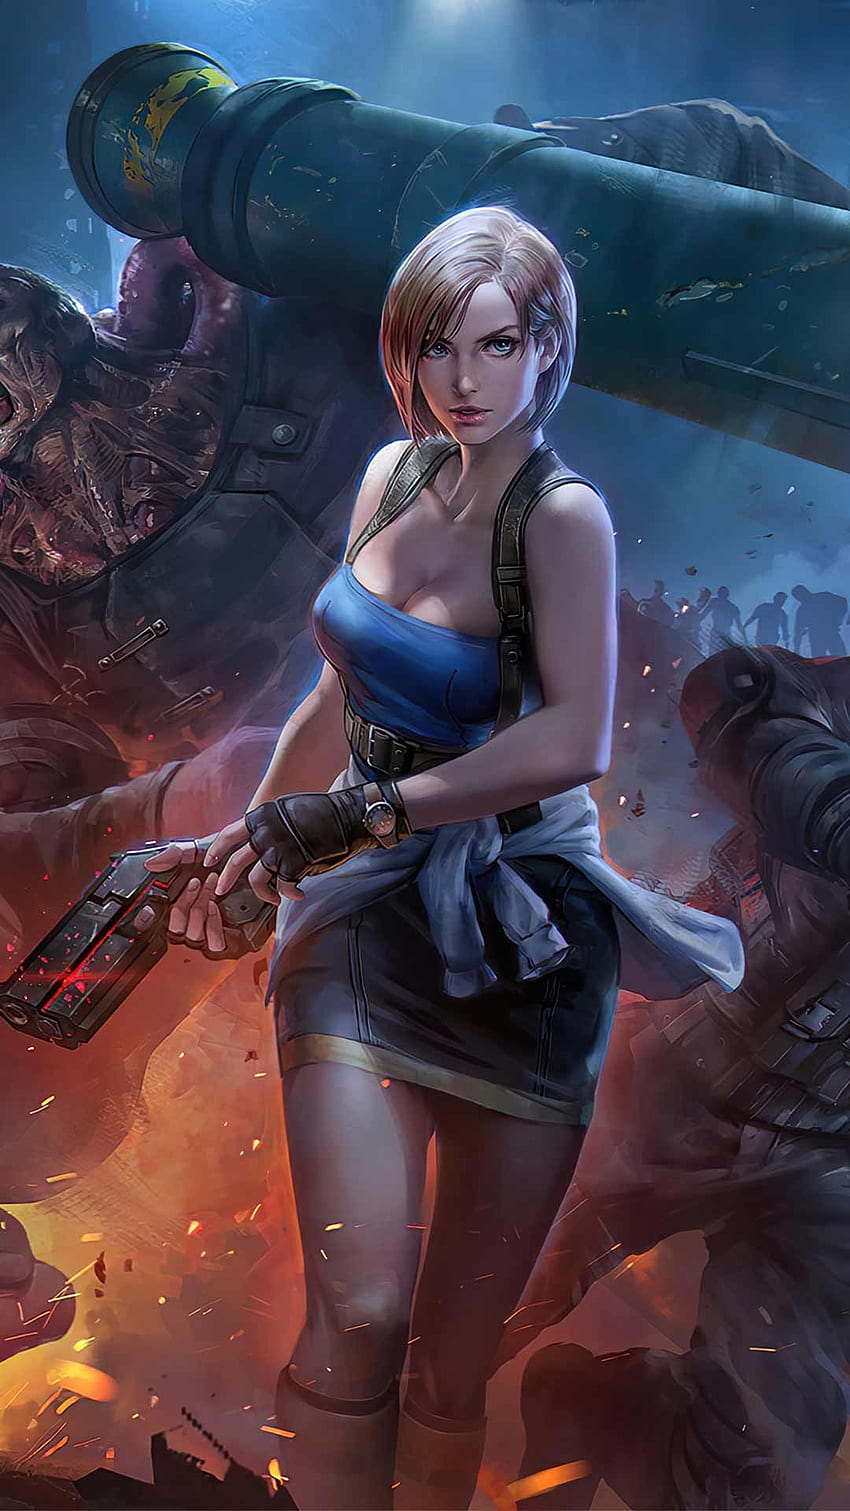 Jill valentine re3 remake phone background 2020 game art Poster on iPhone android in 2020. Resident evil girl, Evil anime, Jill valentine HD phone wallpaper